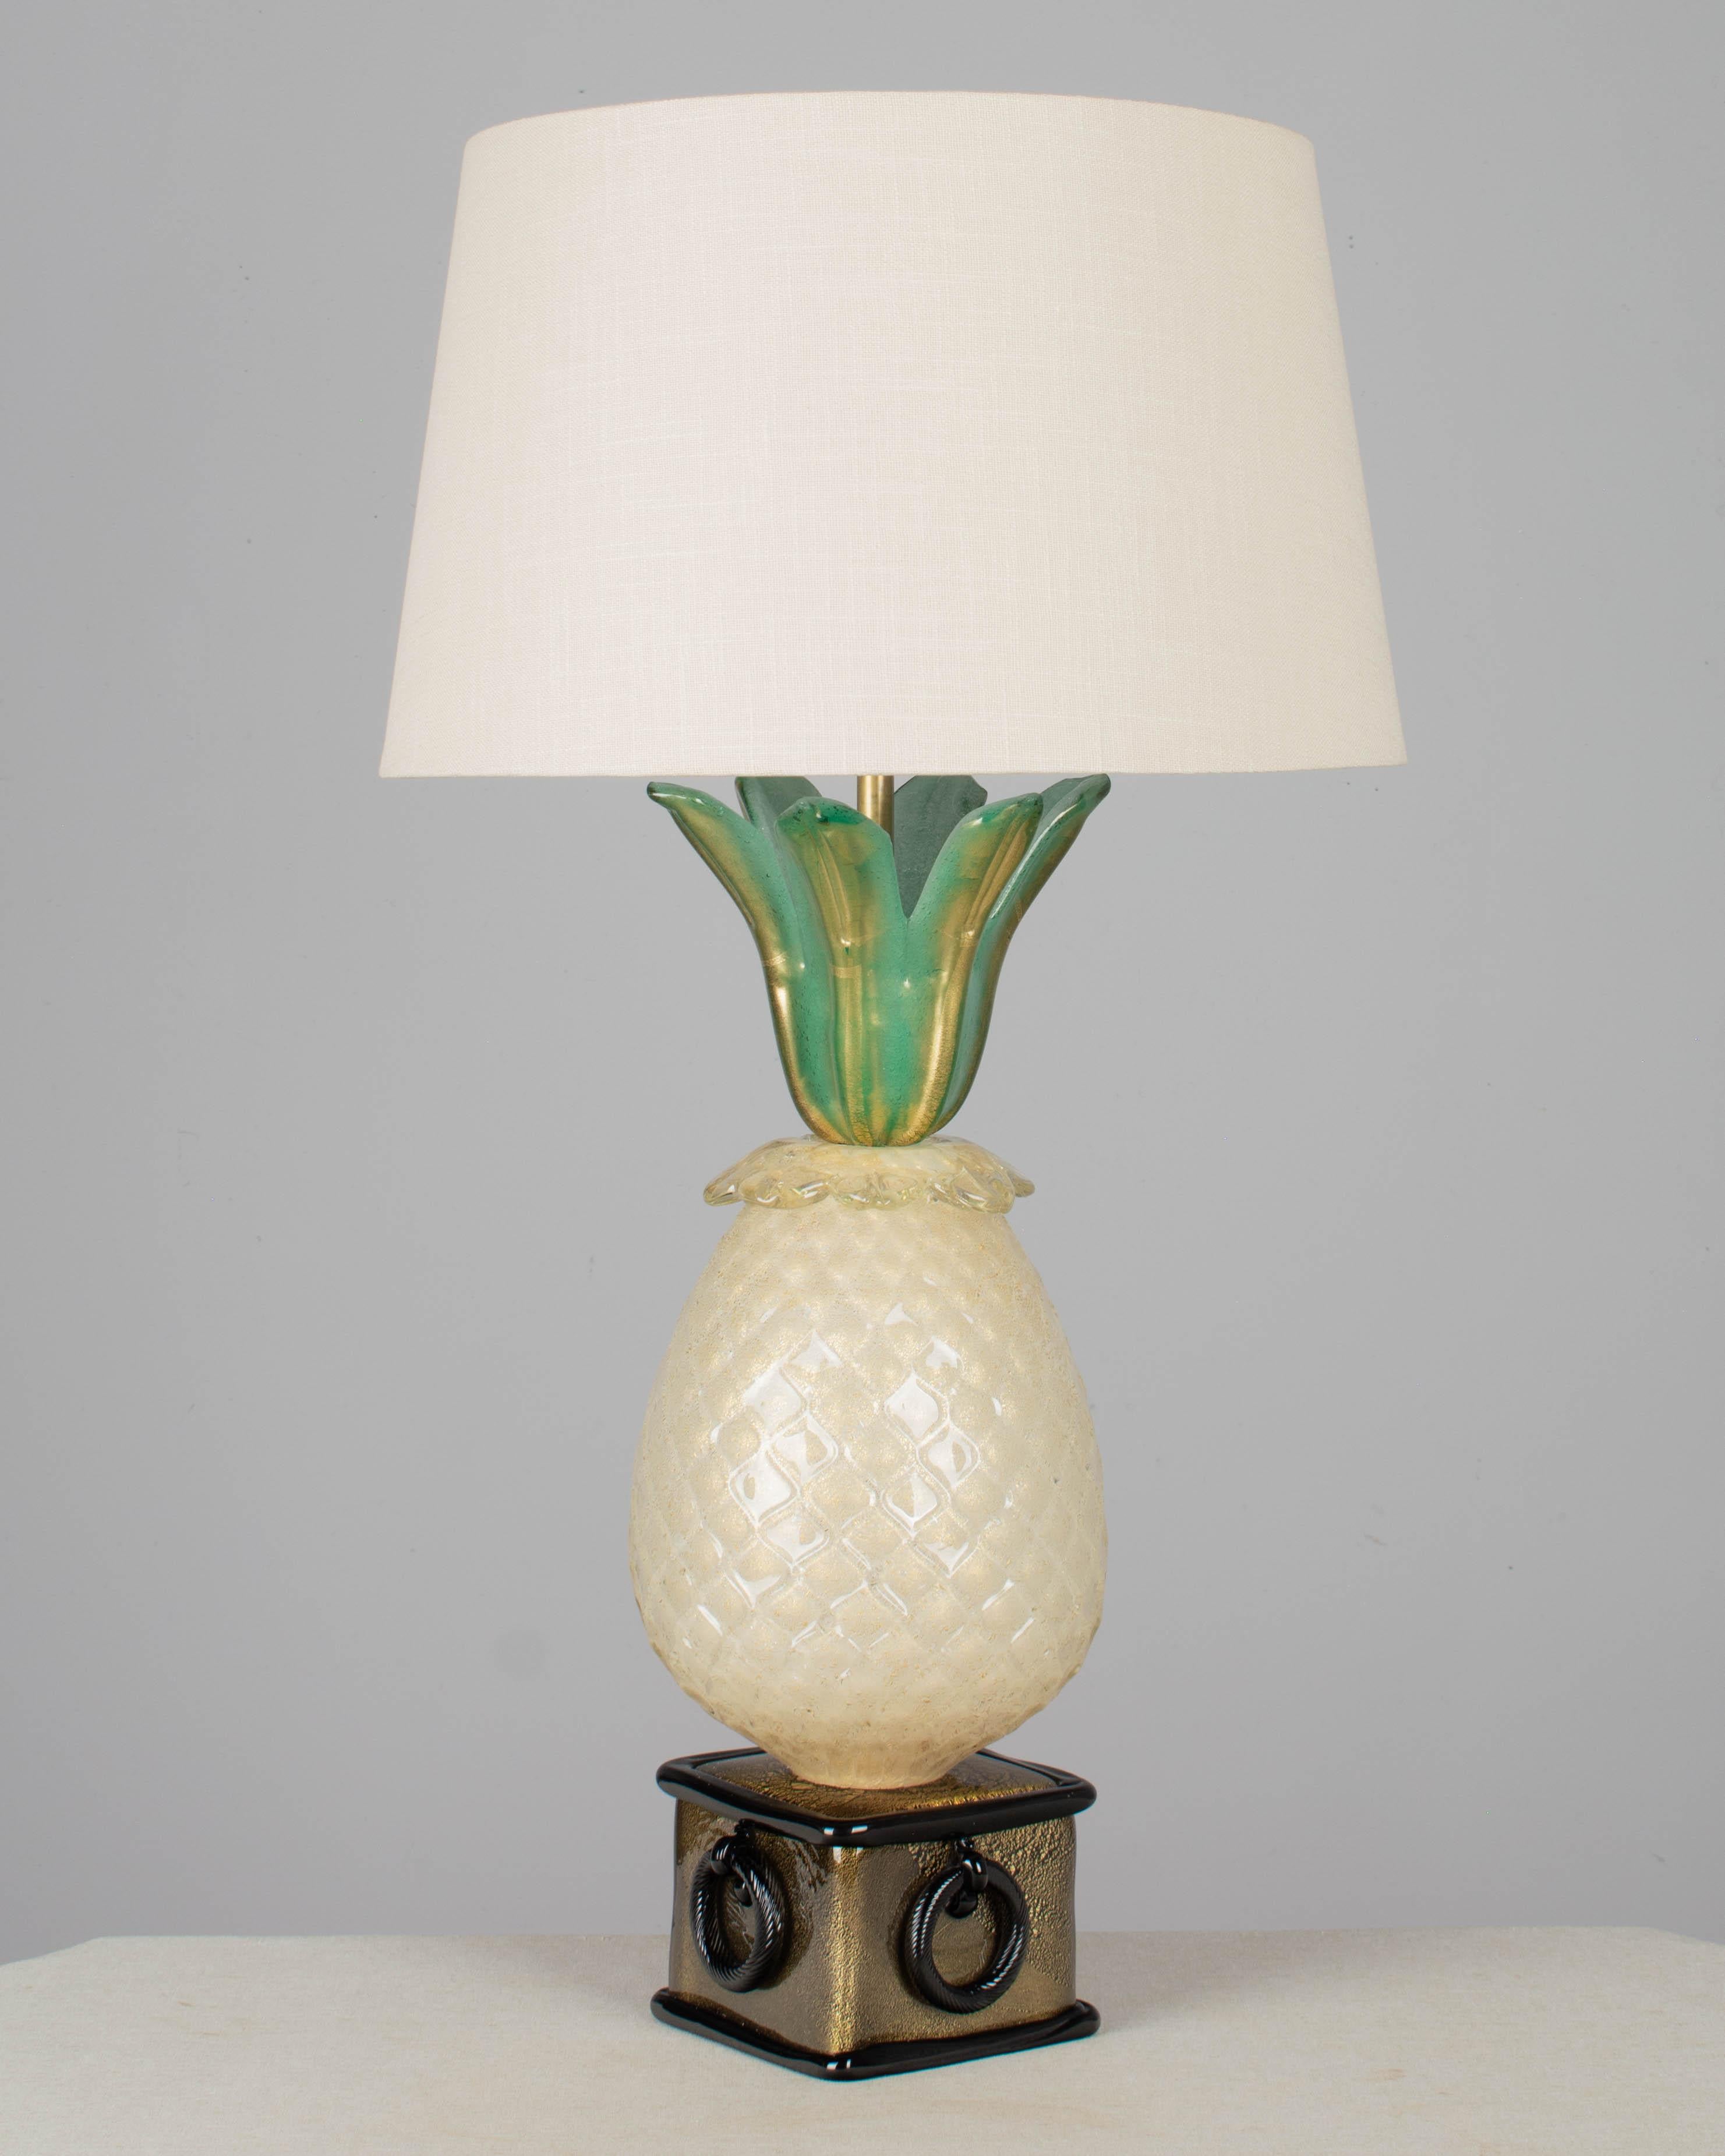 A Mid Century Murano glass pineapple form lamp by Barovier & Toso. In three parts: square black base with ring form details, large textured pineapple, and green leaves, all with gold inclusions. An impressive large statement lamp for an entryway or